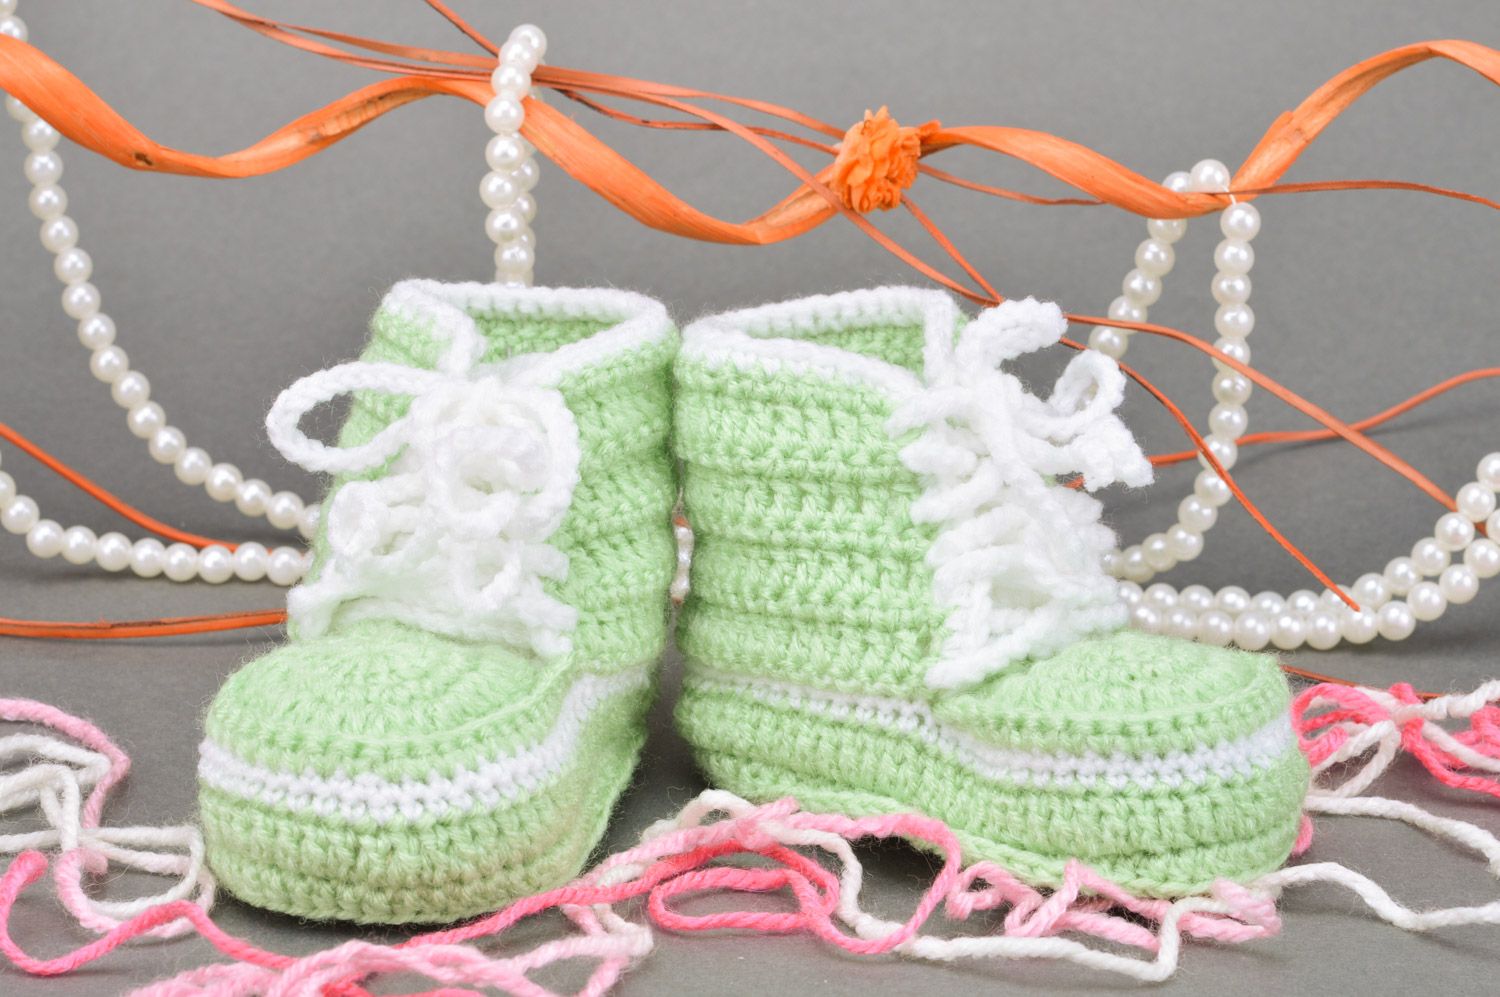 Handmade crocheted lace light green baby booties made of cotton photo 1